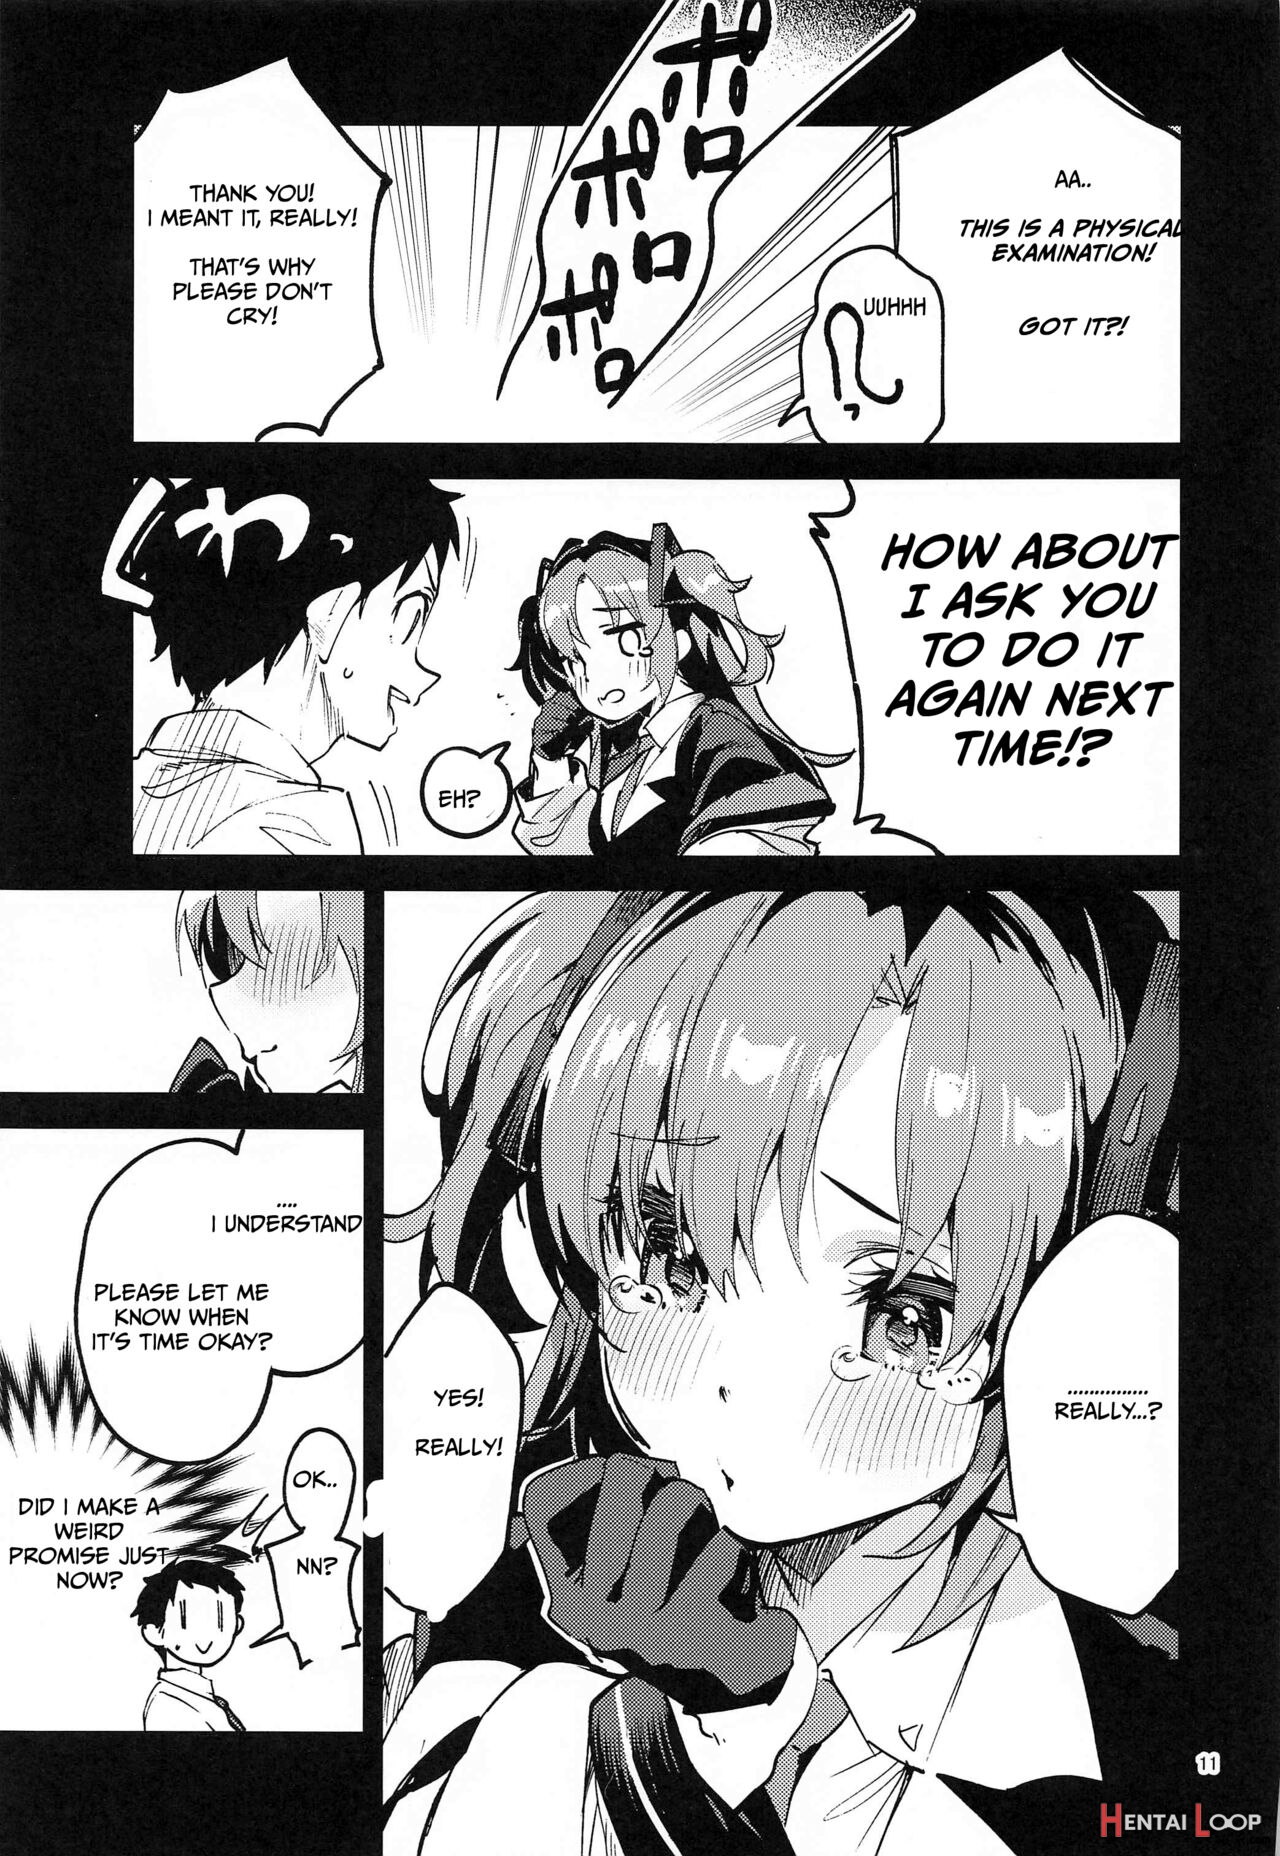 Yakusoku Ga Ooi Seito - A Student With Many Commitments page 10